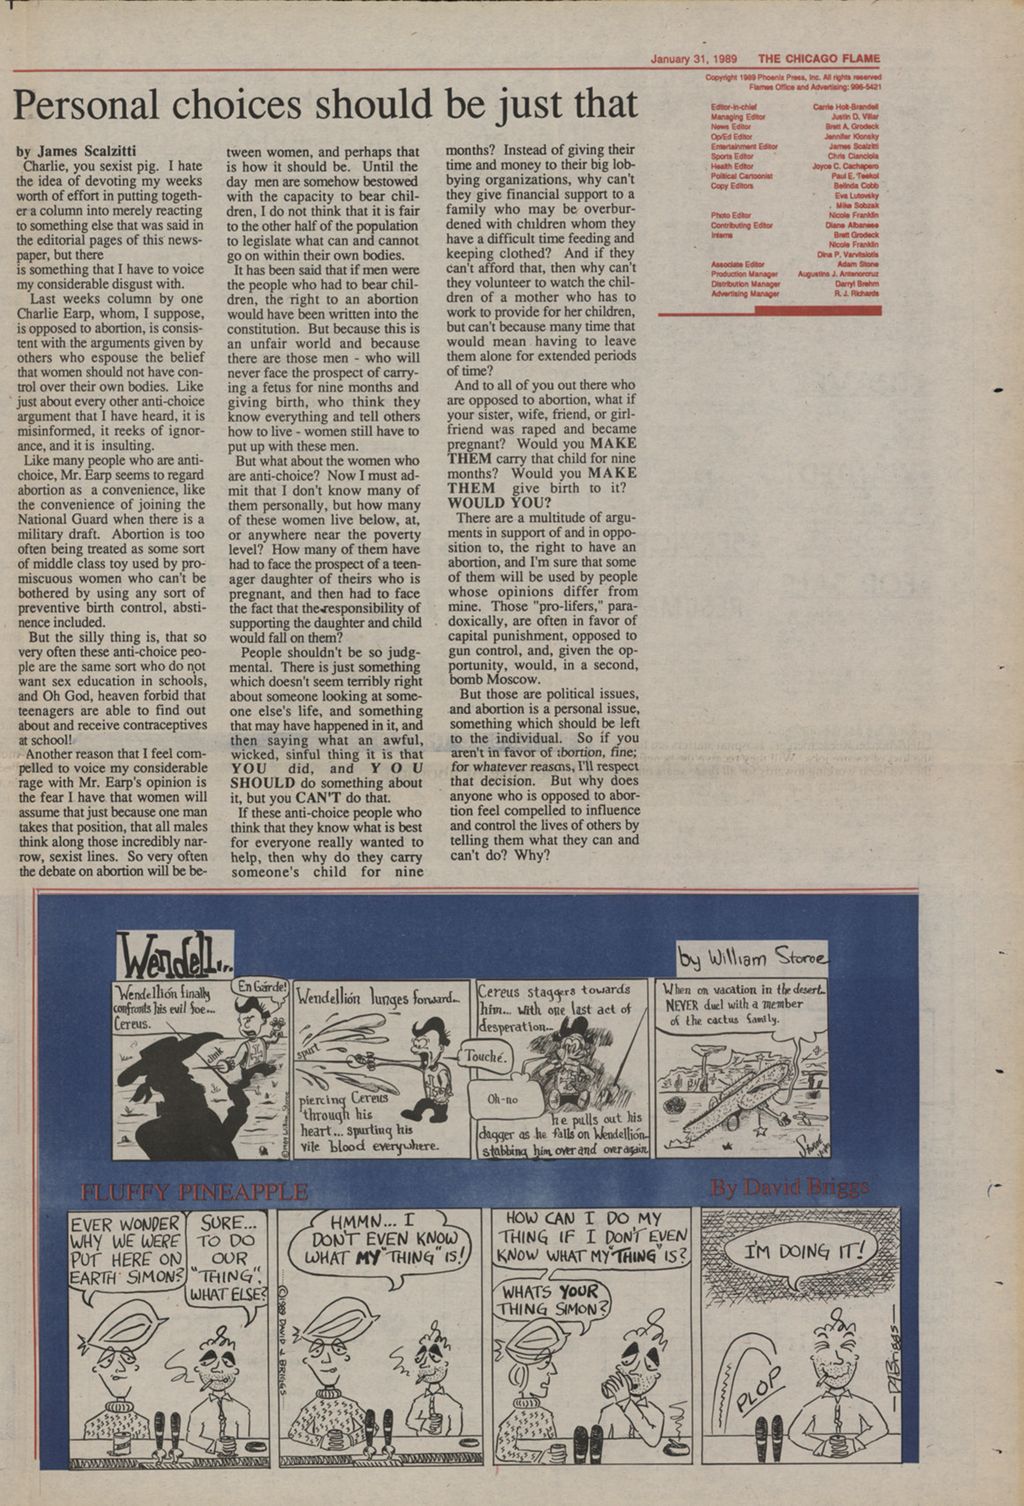 Miniature of Chicago Flame (January 31, 1989)